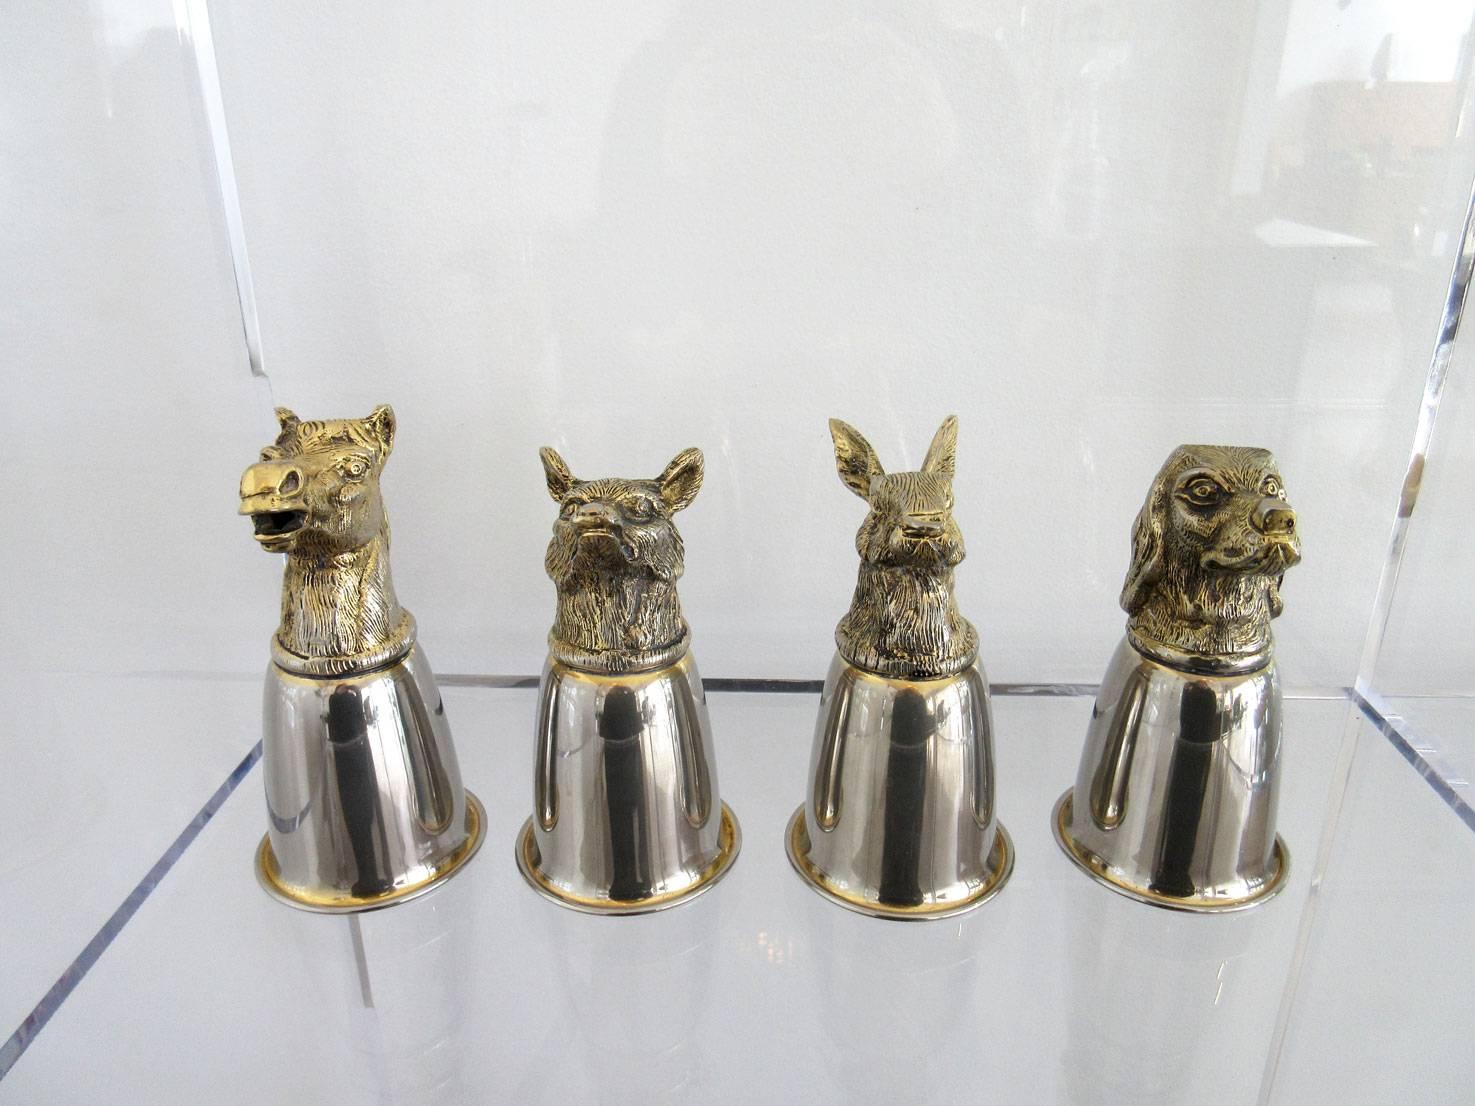 Vintage set of four Gucci stirrup cups a horse, hare, fox and dog. The cups are each individually signed and are made of brass and silver plate.